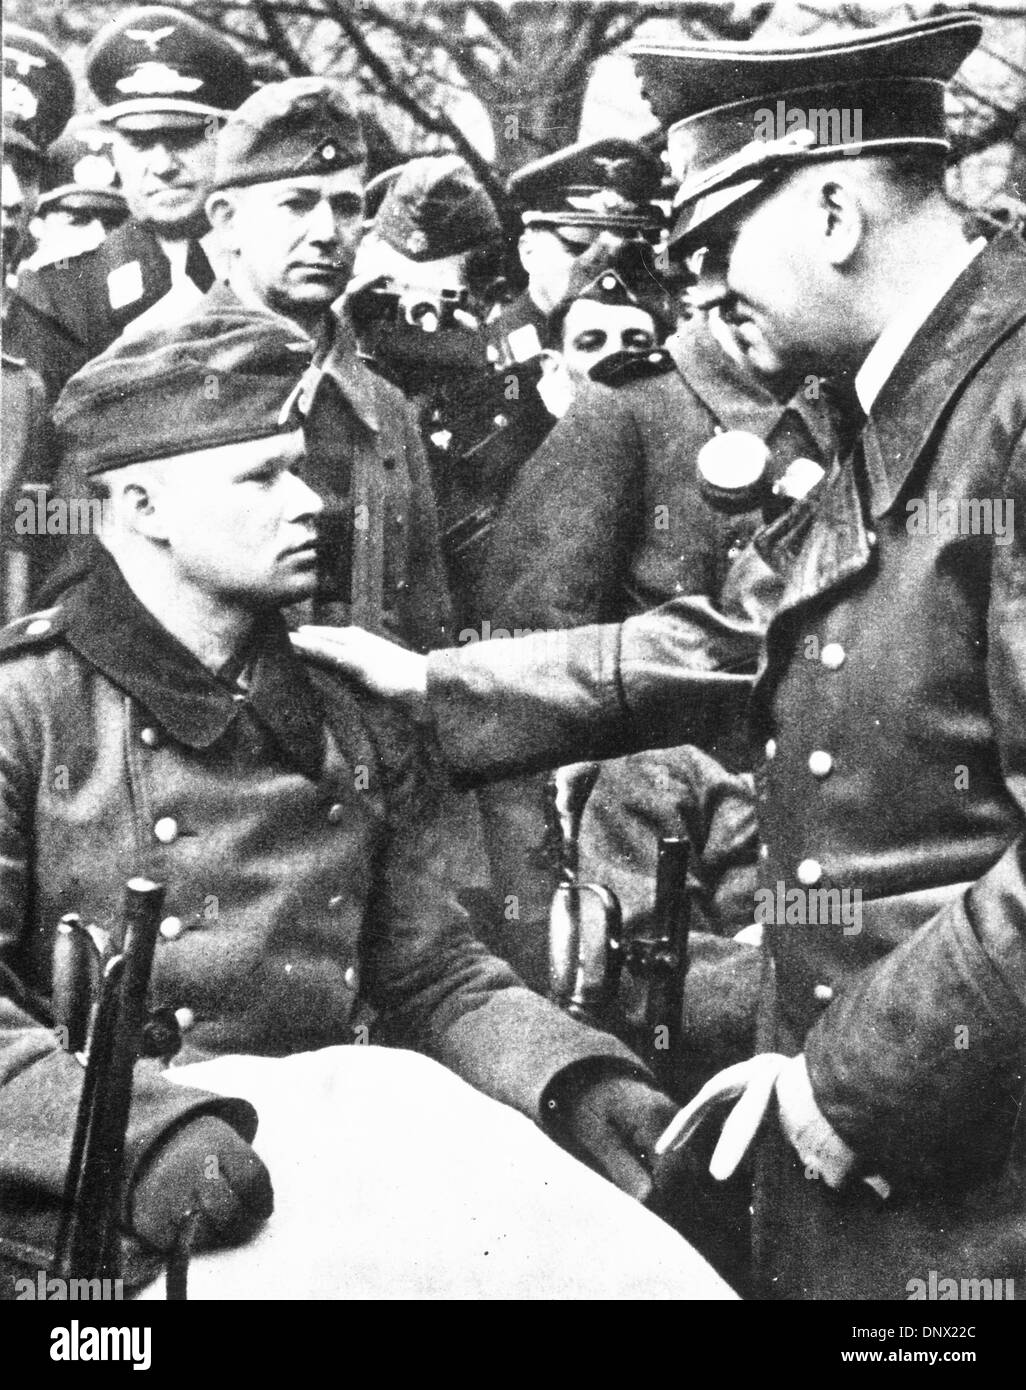 Oct. 7, 1939 - Berlin, Germany - ADOLF HITLER talks to a wounded Nazi. Adolf Hitler (April 20, 1889-April 30, 1945) was the Fuhrer und Reichskanzler (Leader and Imperial chancellor) of Germany from 1933 to his death. He was leader of the National Socialist German Workers Party (NSDAP), better known as the Nazi Party. The racial policies that Hitler directed culminated in a massive  Stock Photo